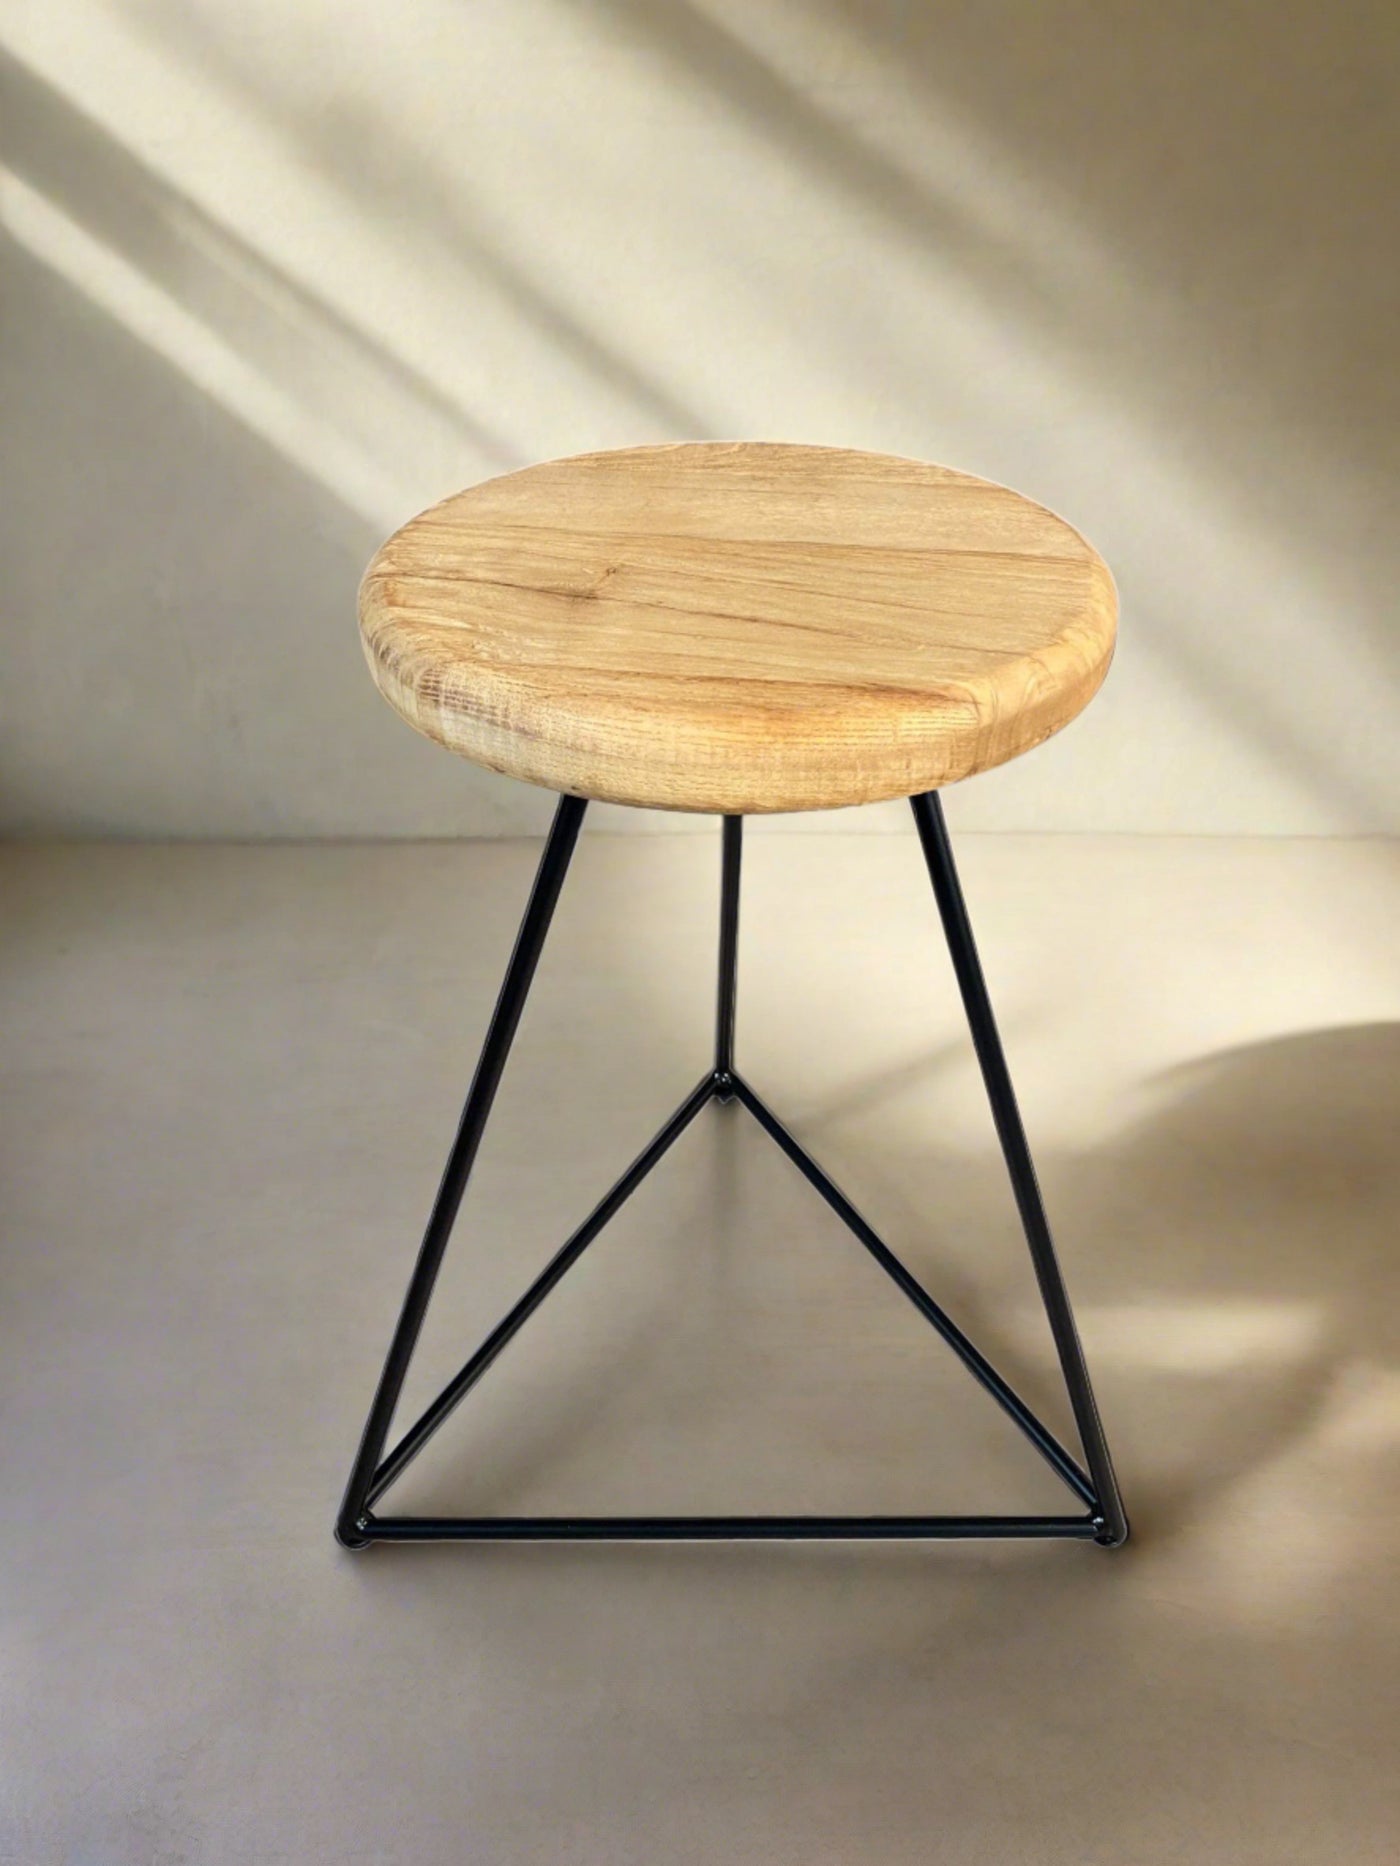 Old Barn Prism Stool - Round